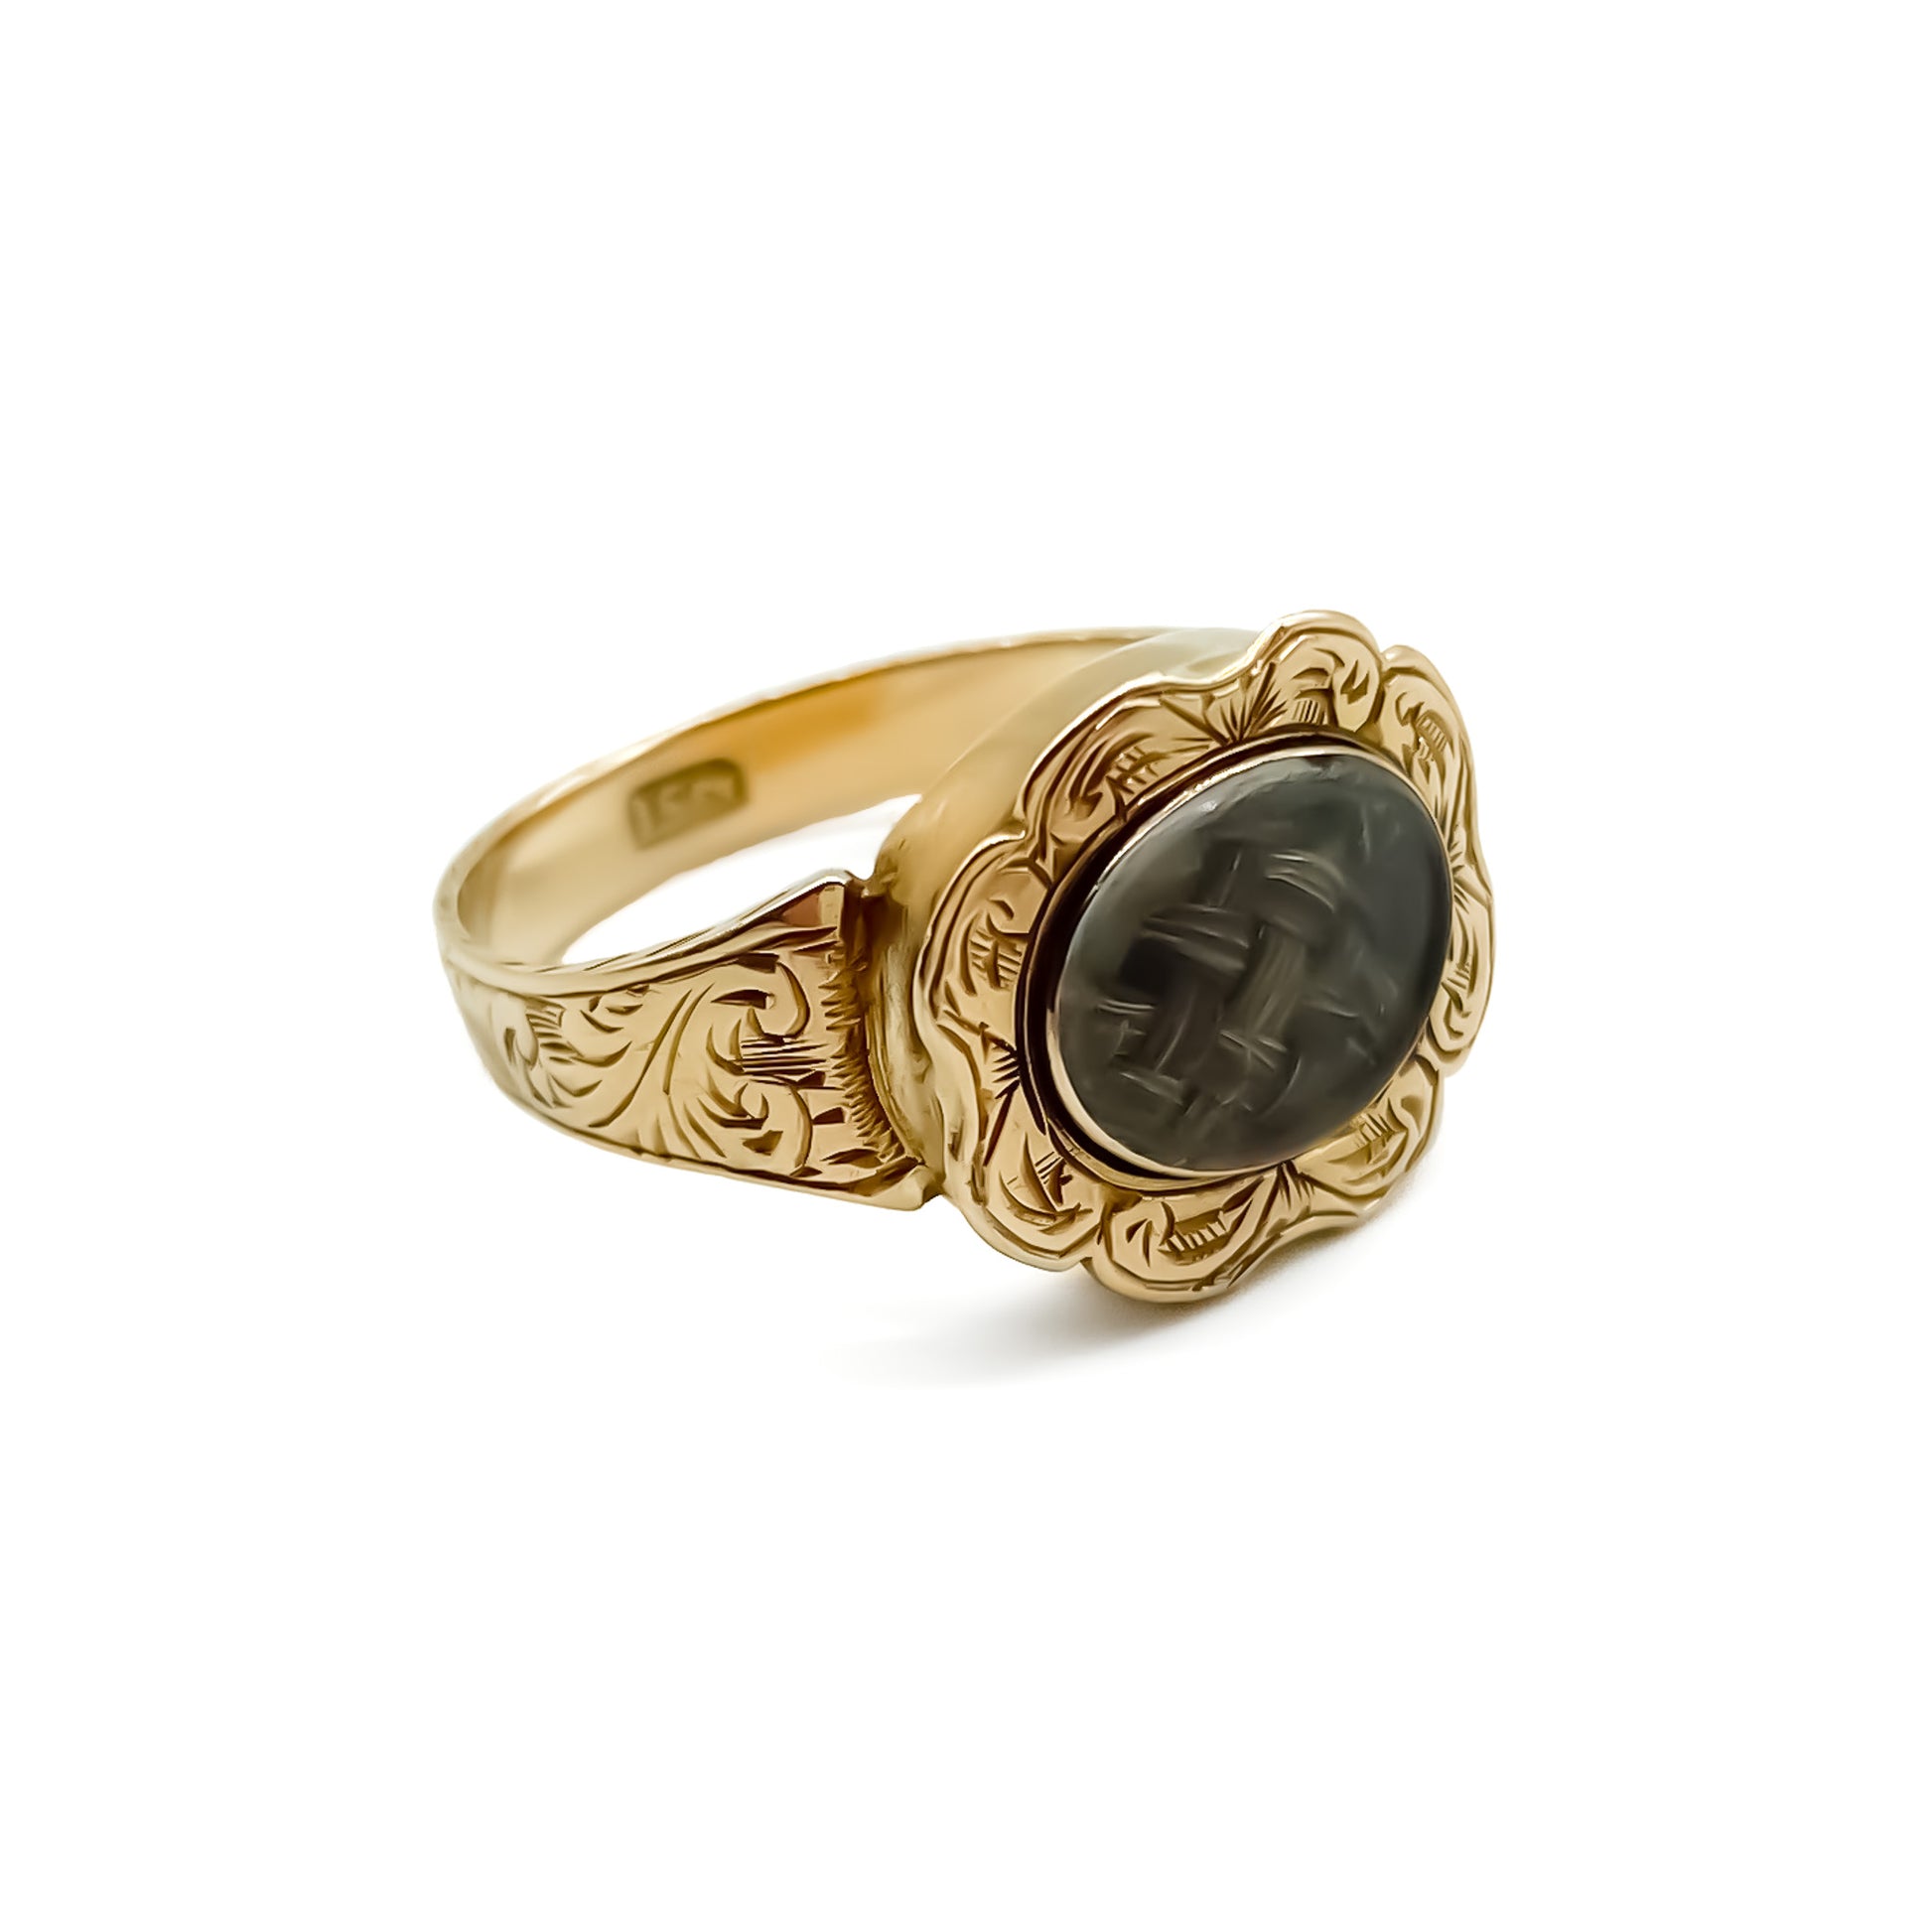 Beautifully engraved 15ct rose gold Victorian mourning ring with plaited hair behind bevelled glass.